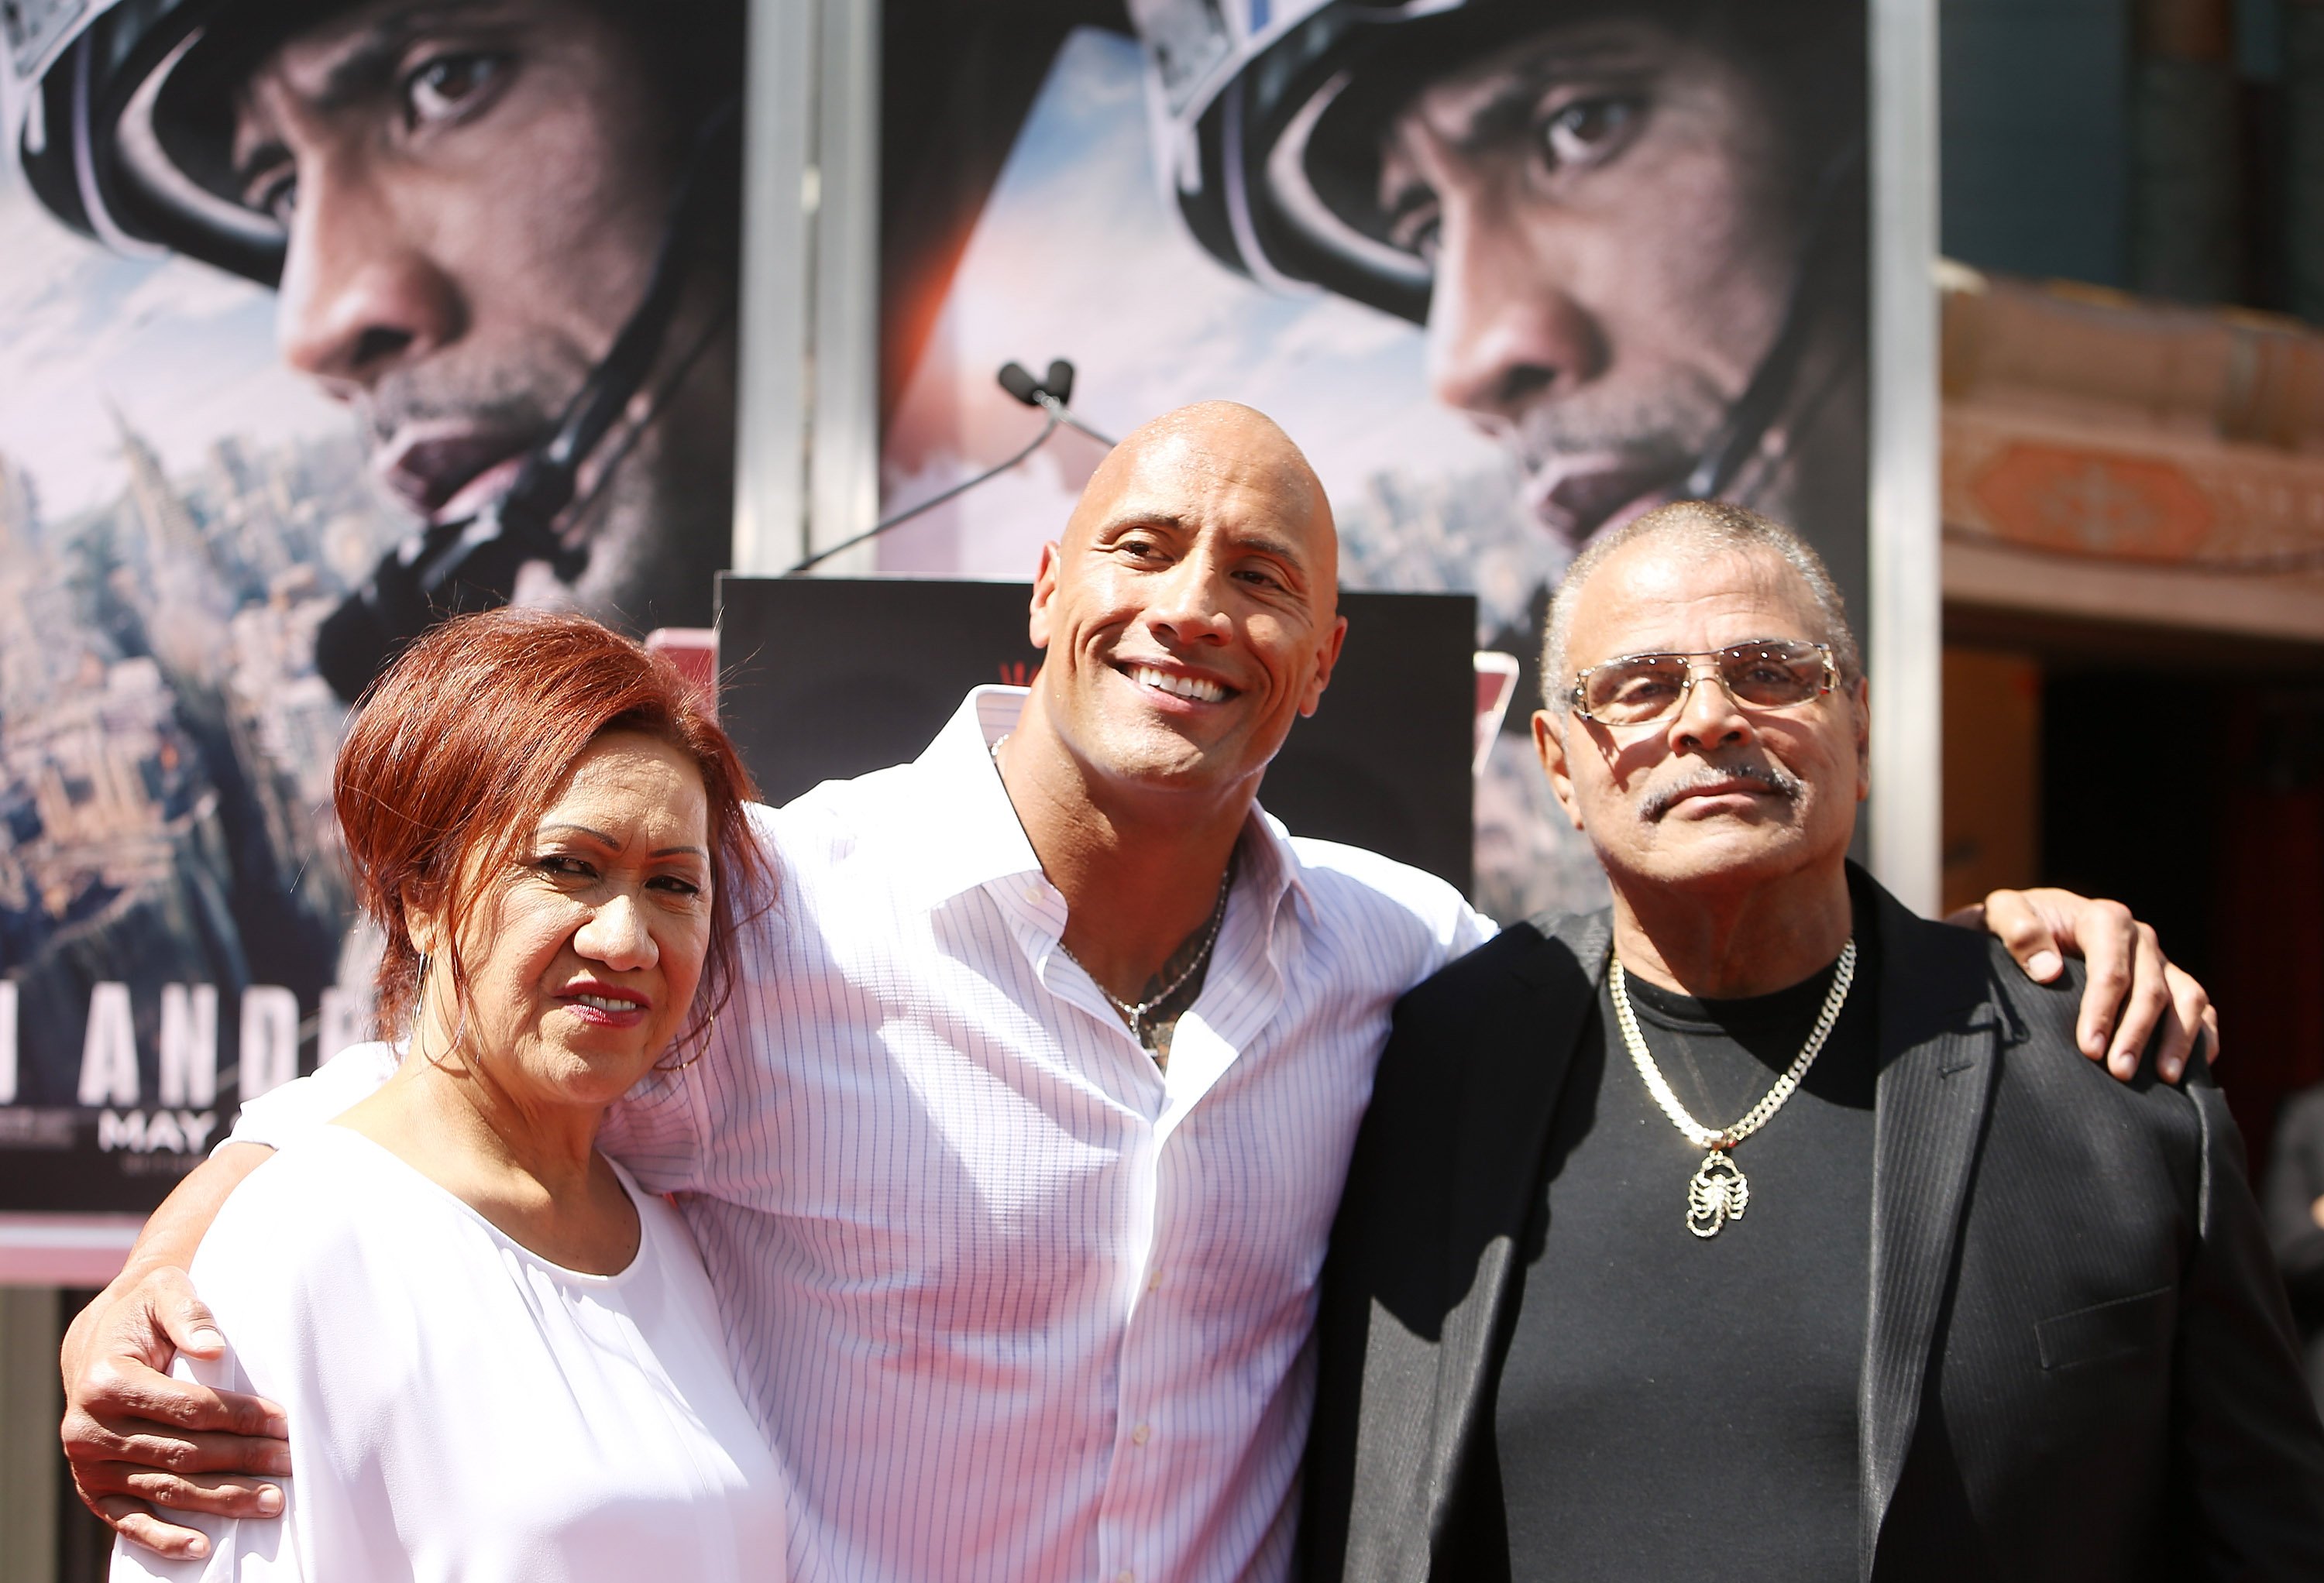 Dwayne "The Rock" Johnson (C) and his mom and dad at the hand/footprint ceremony honoring him held at TCL Chinese Theatre IMAX on May 19, 2015 in Hollywood, California. | Getty Images